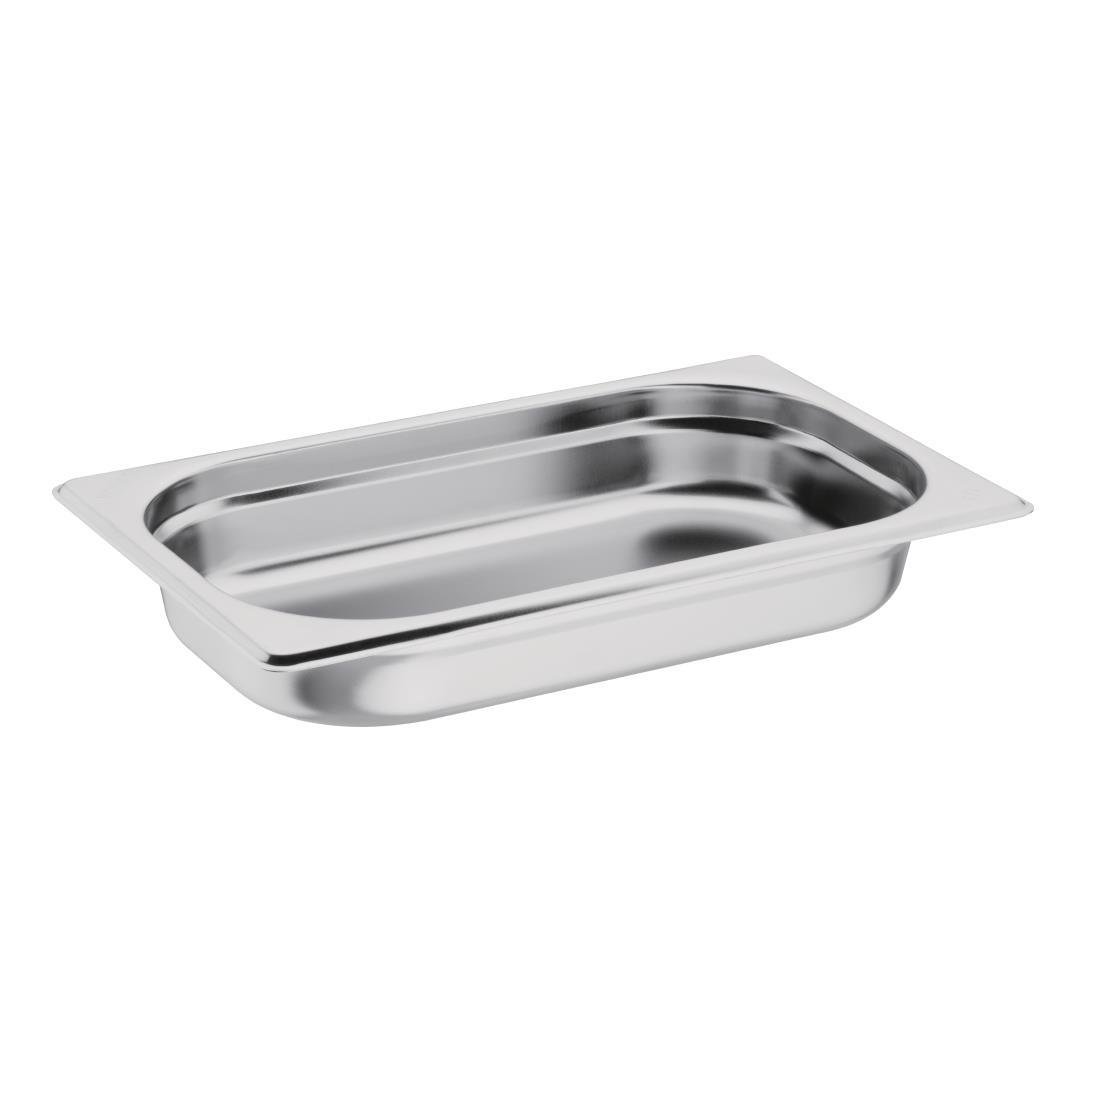 Vogue Stainless Steel 1/4 Gastronorm Pan 40mm - GM313  - 1